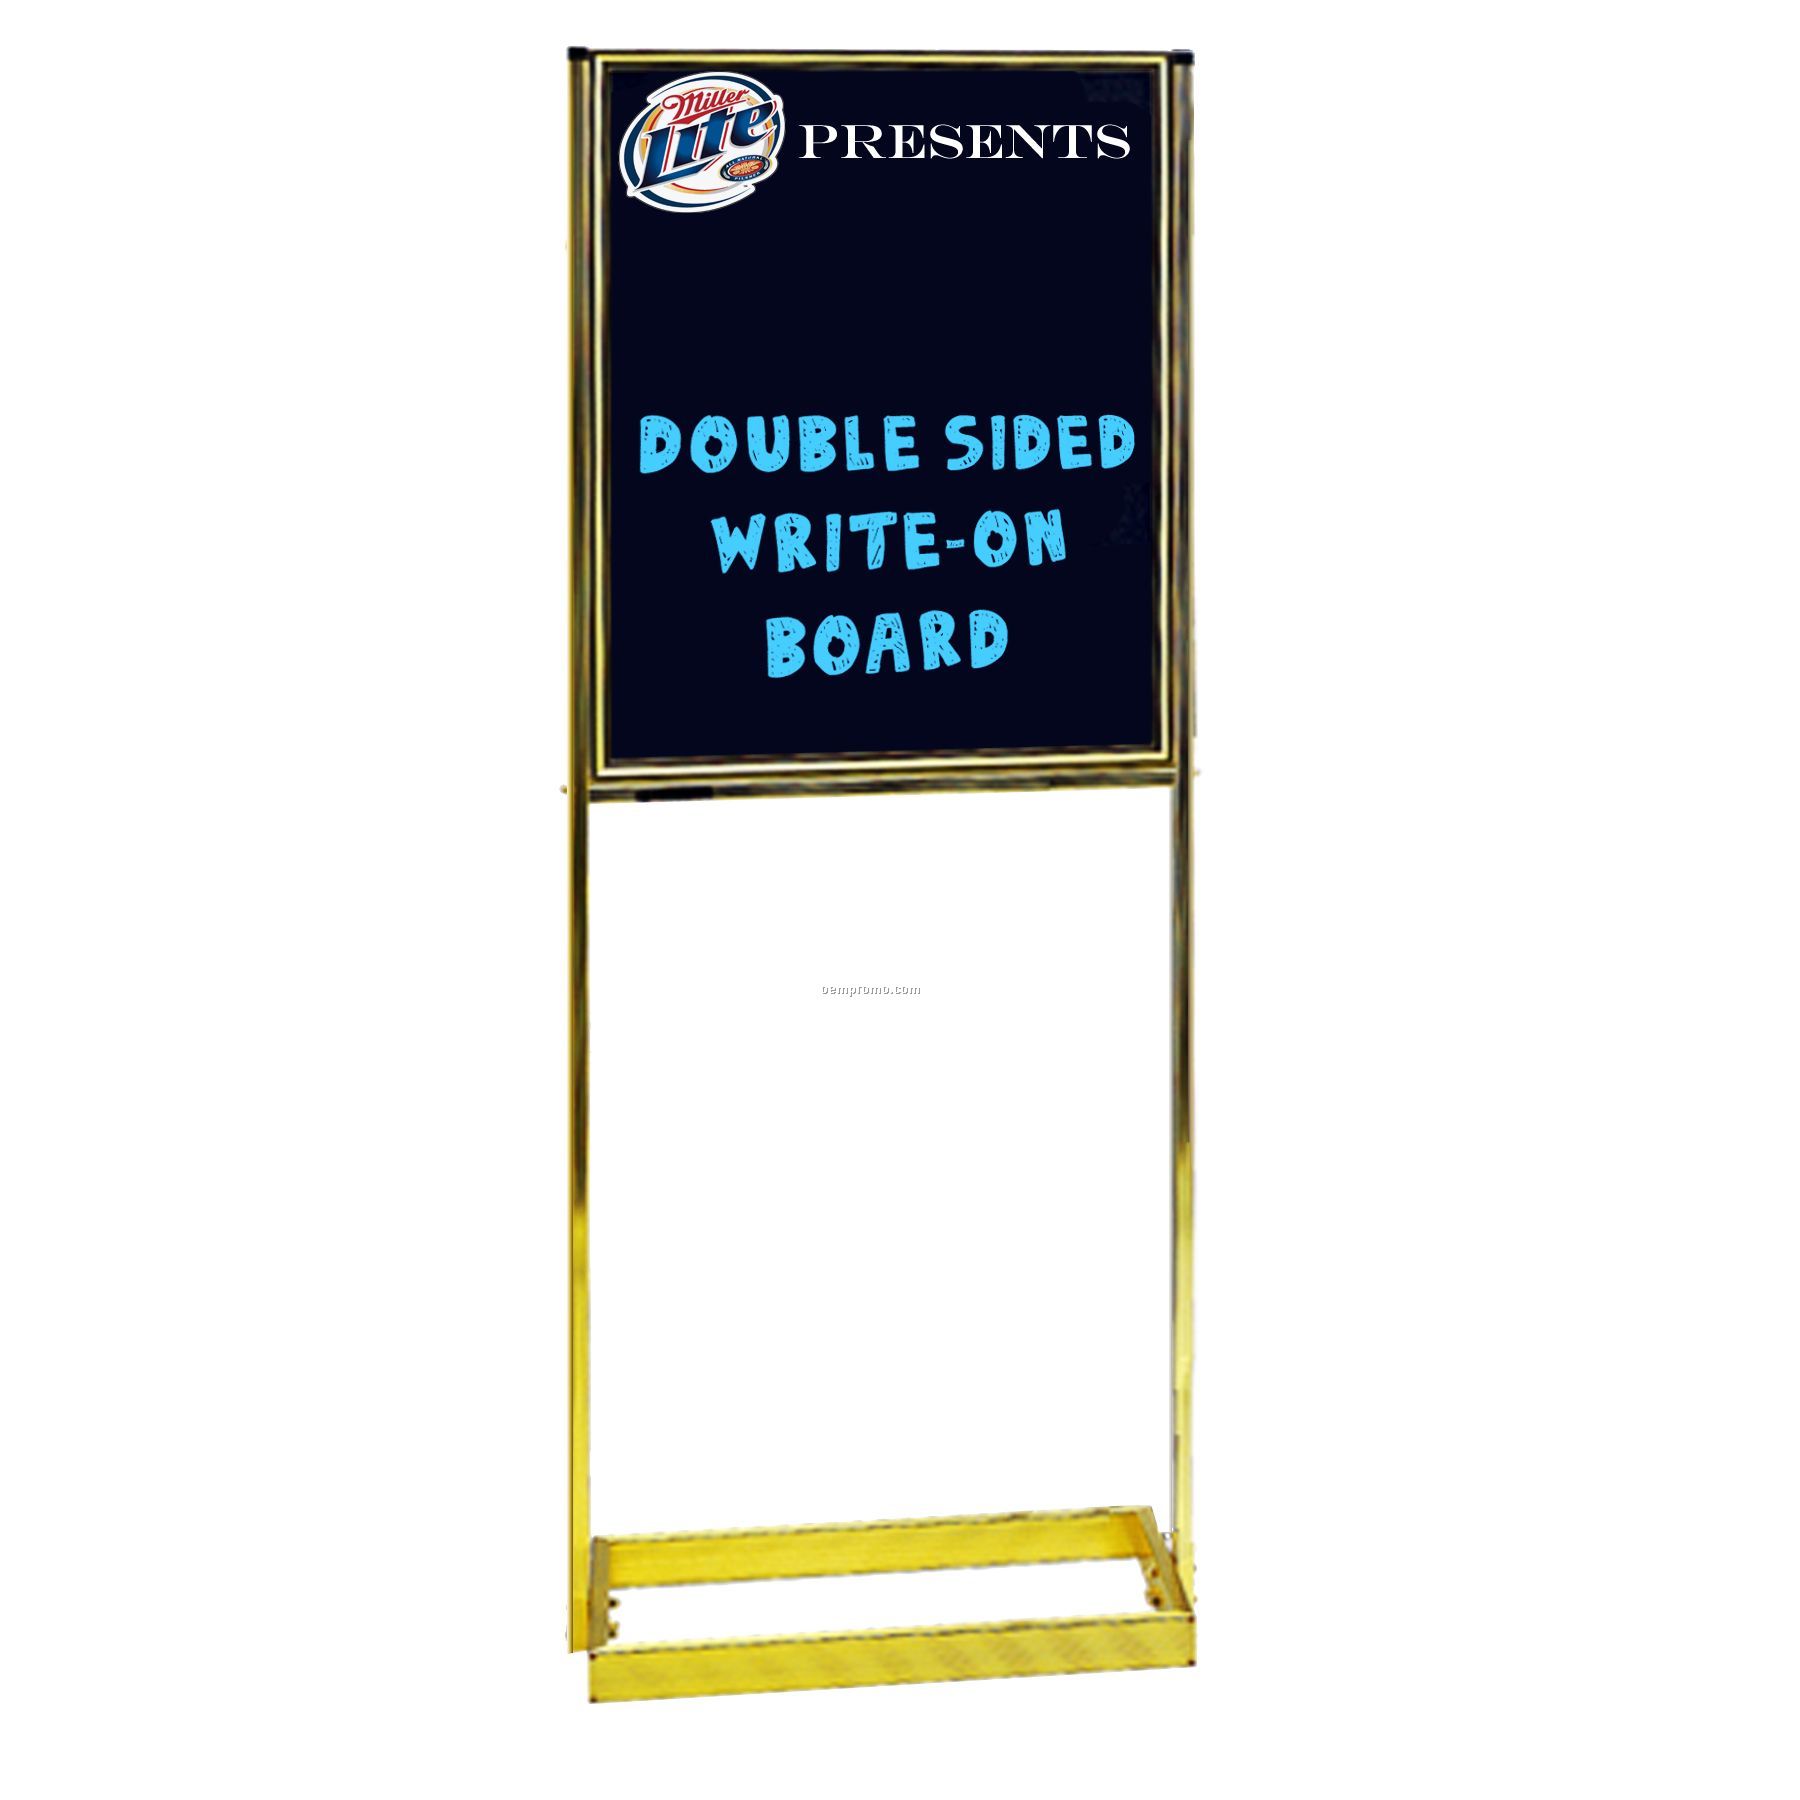 Double Faced Write-on Board W/ Brass Floor Stand (25"X63")